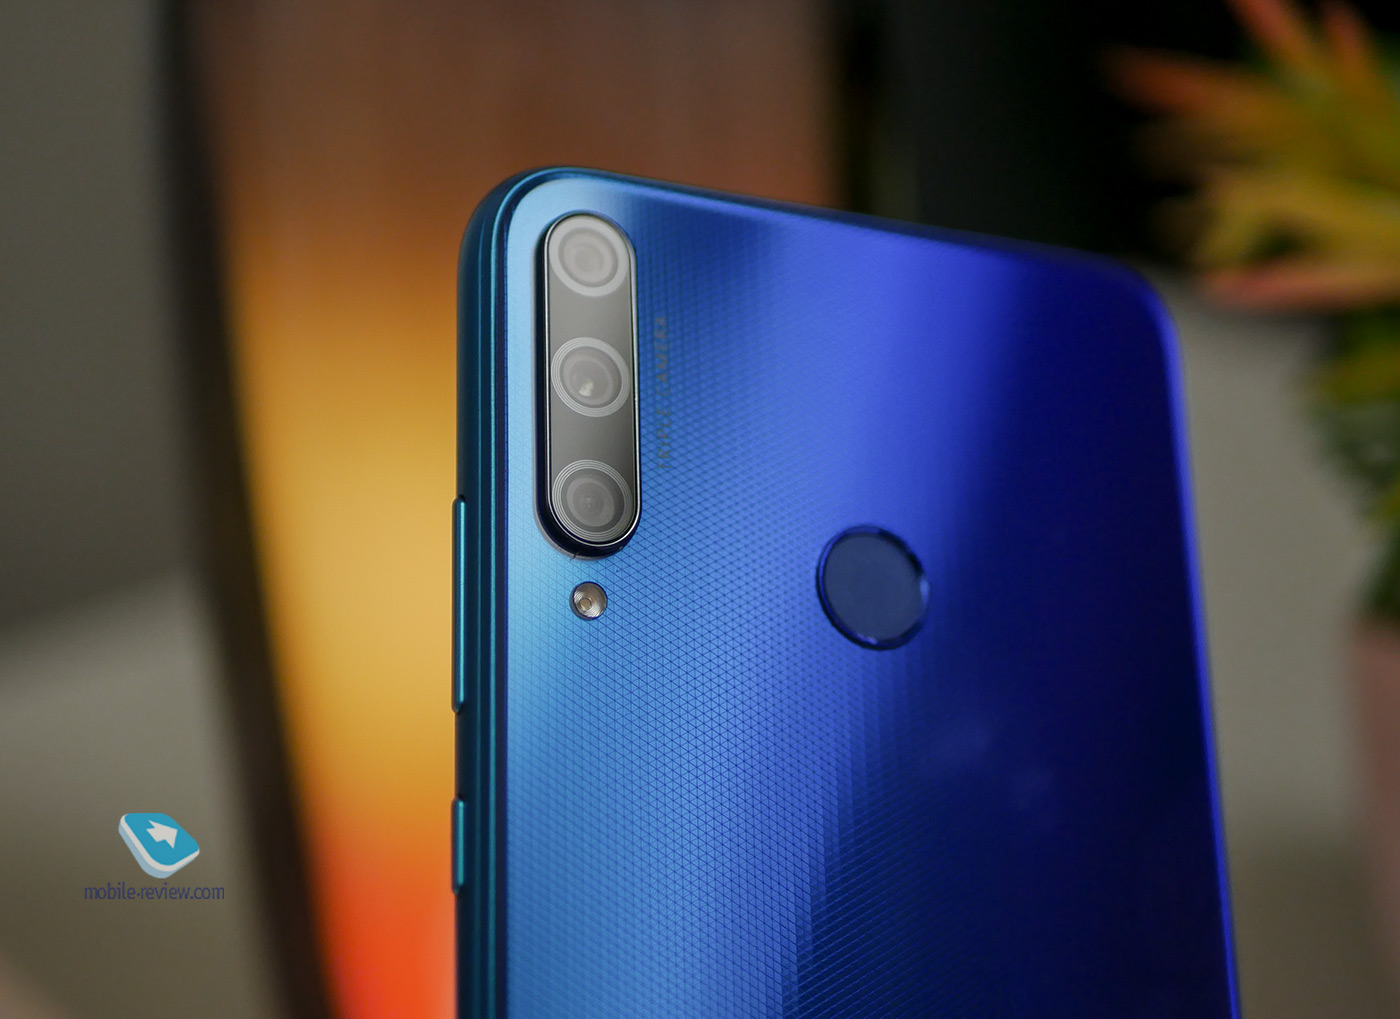 Honor 9C smartphone review - first available from AppGallery